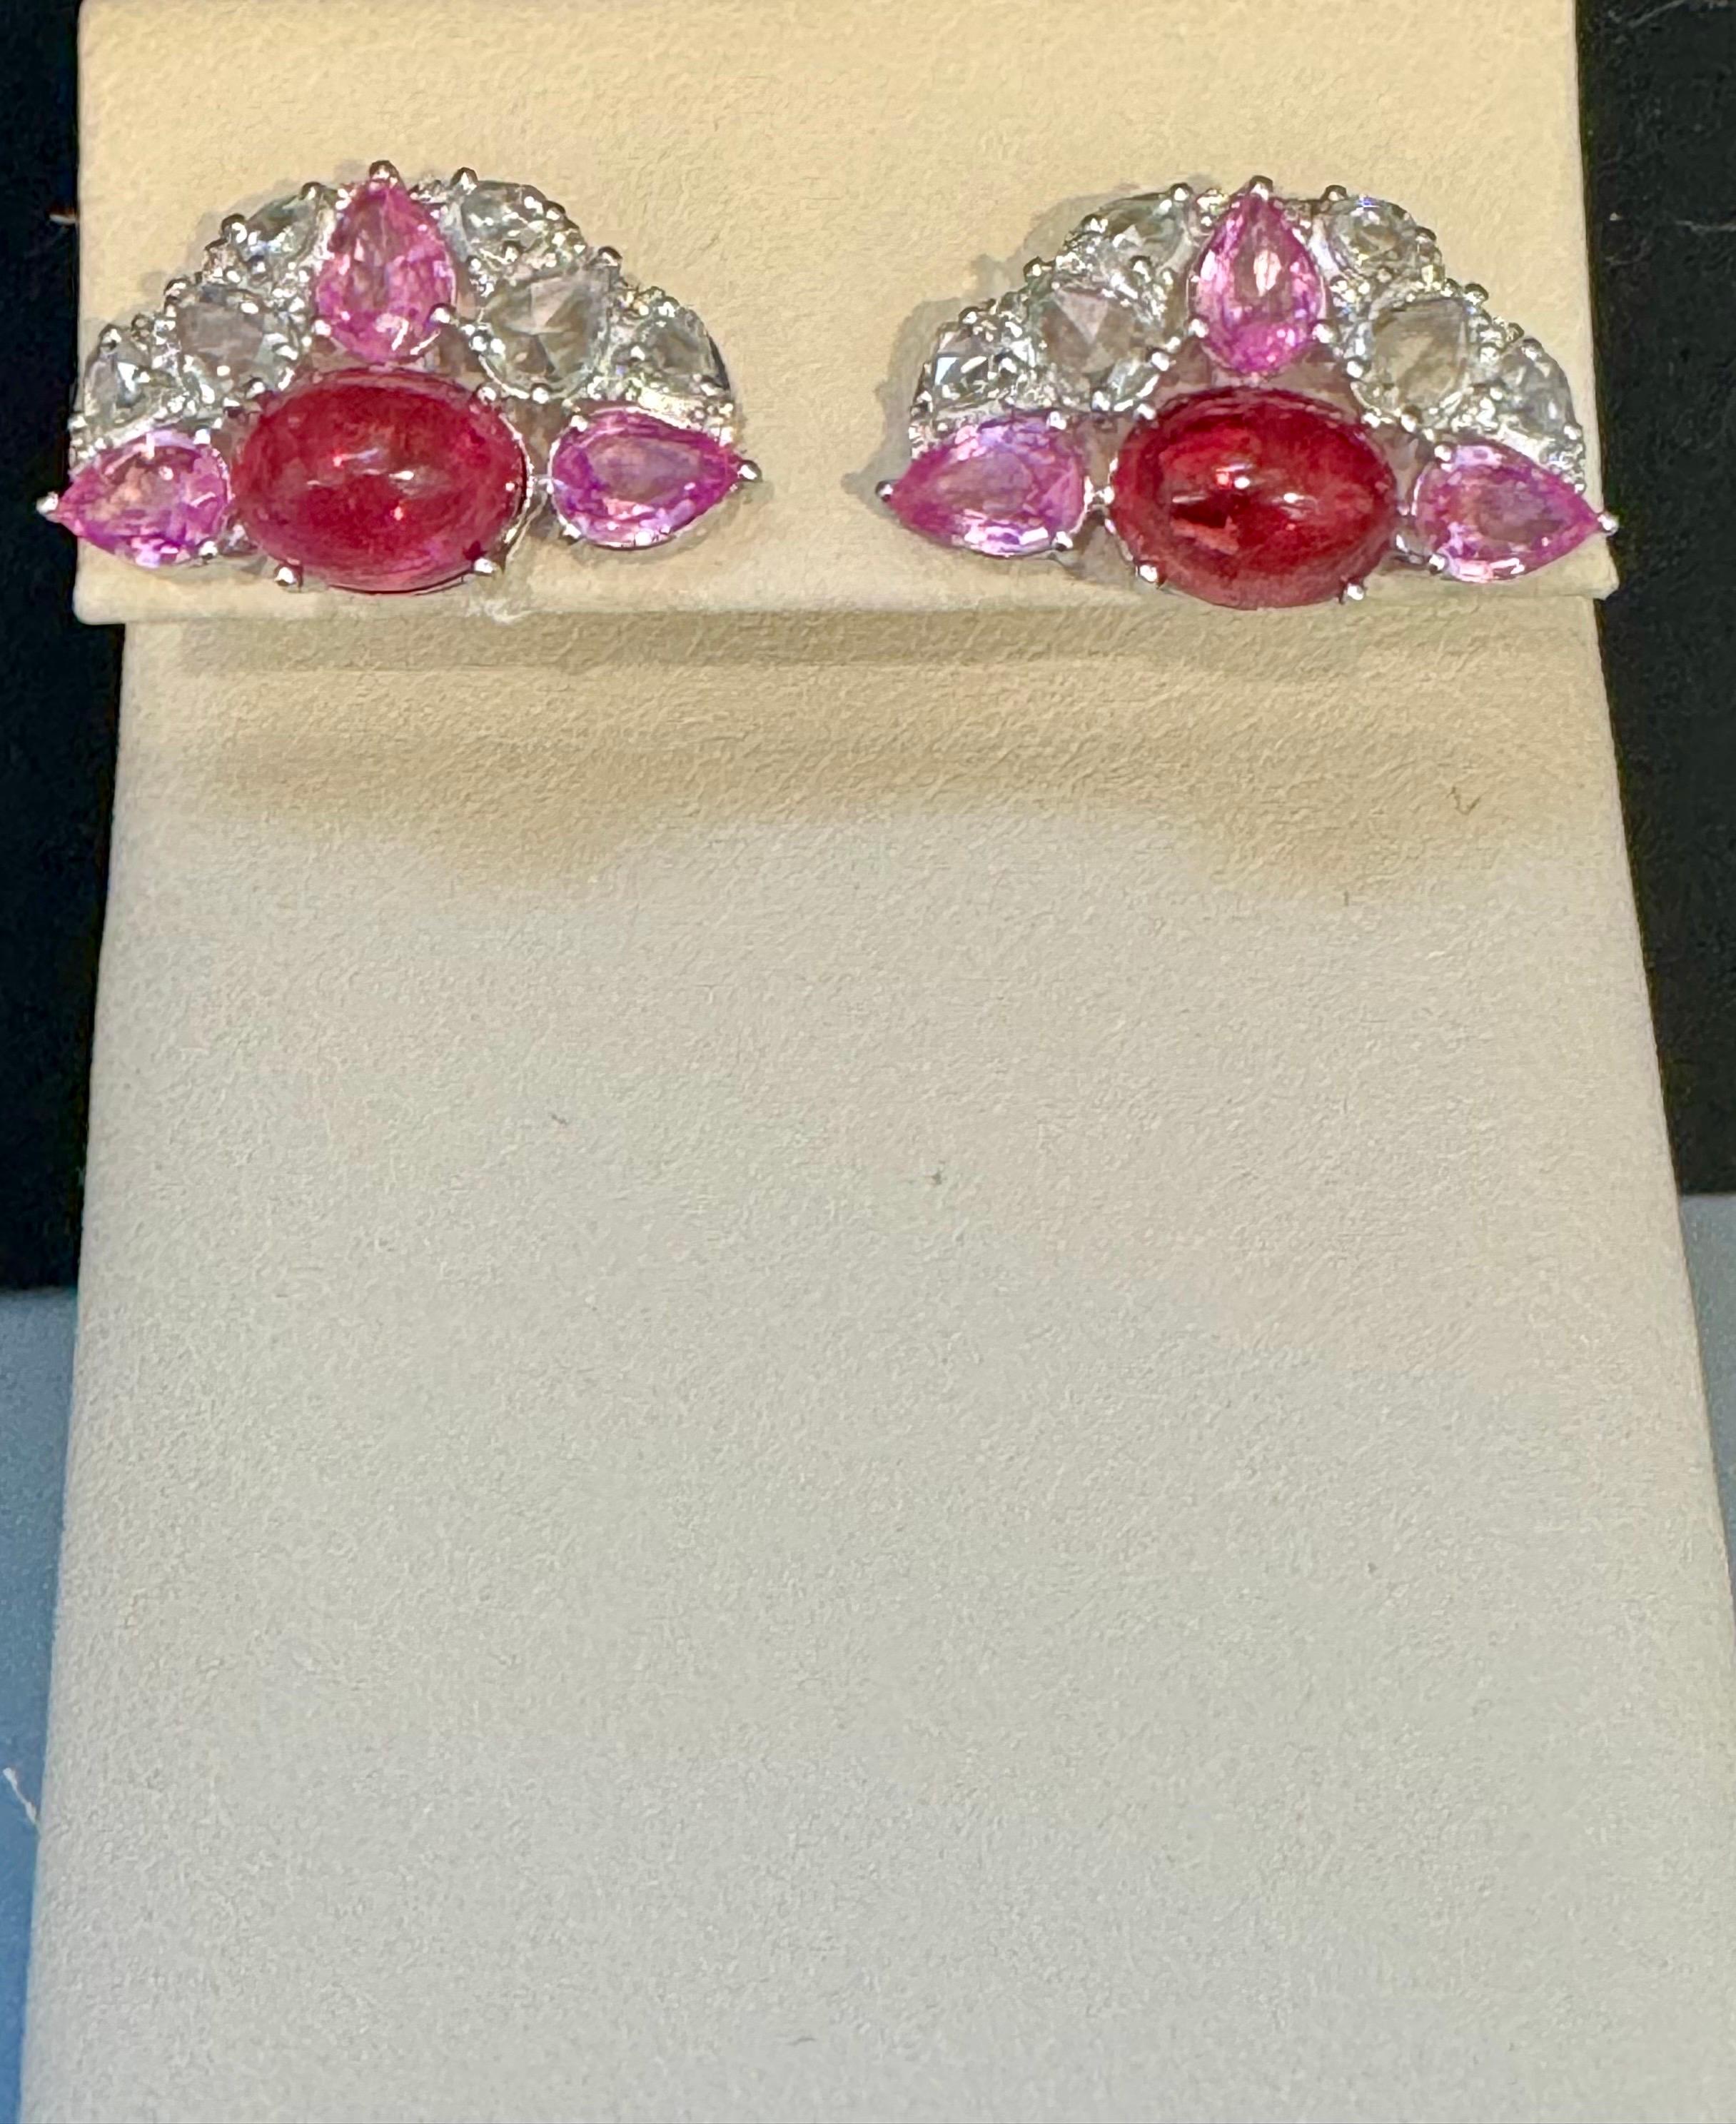 Cabochon Pink Tourmaline and Pink Sapphire Earrings with Rose Cut Diamonds 18 Karat Gold For Sale